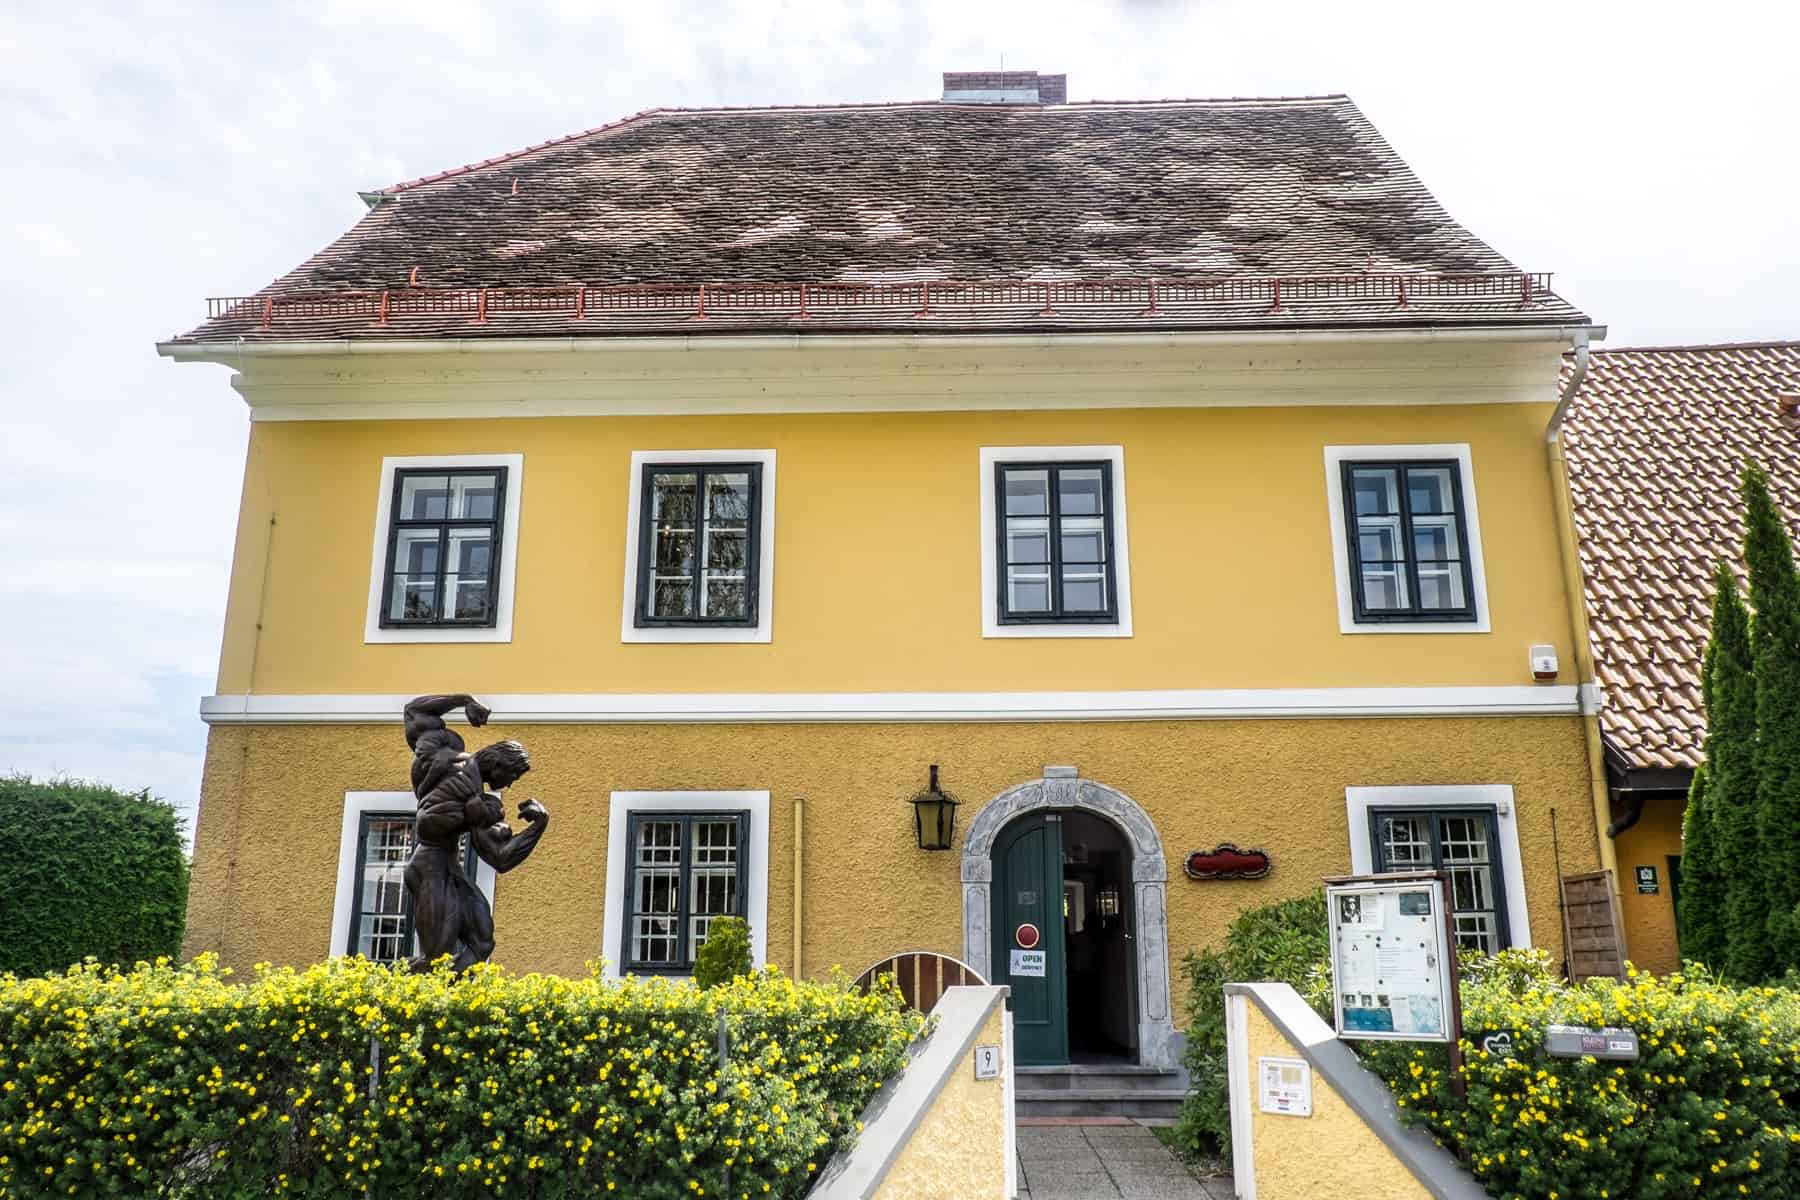 The yellow birth house of Arnold Schwarzenegger in Thal, Austria, marked by a bodybuilding statue outside